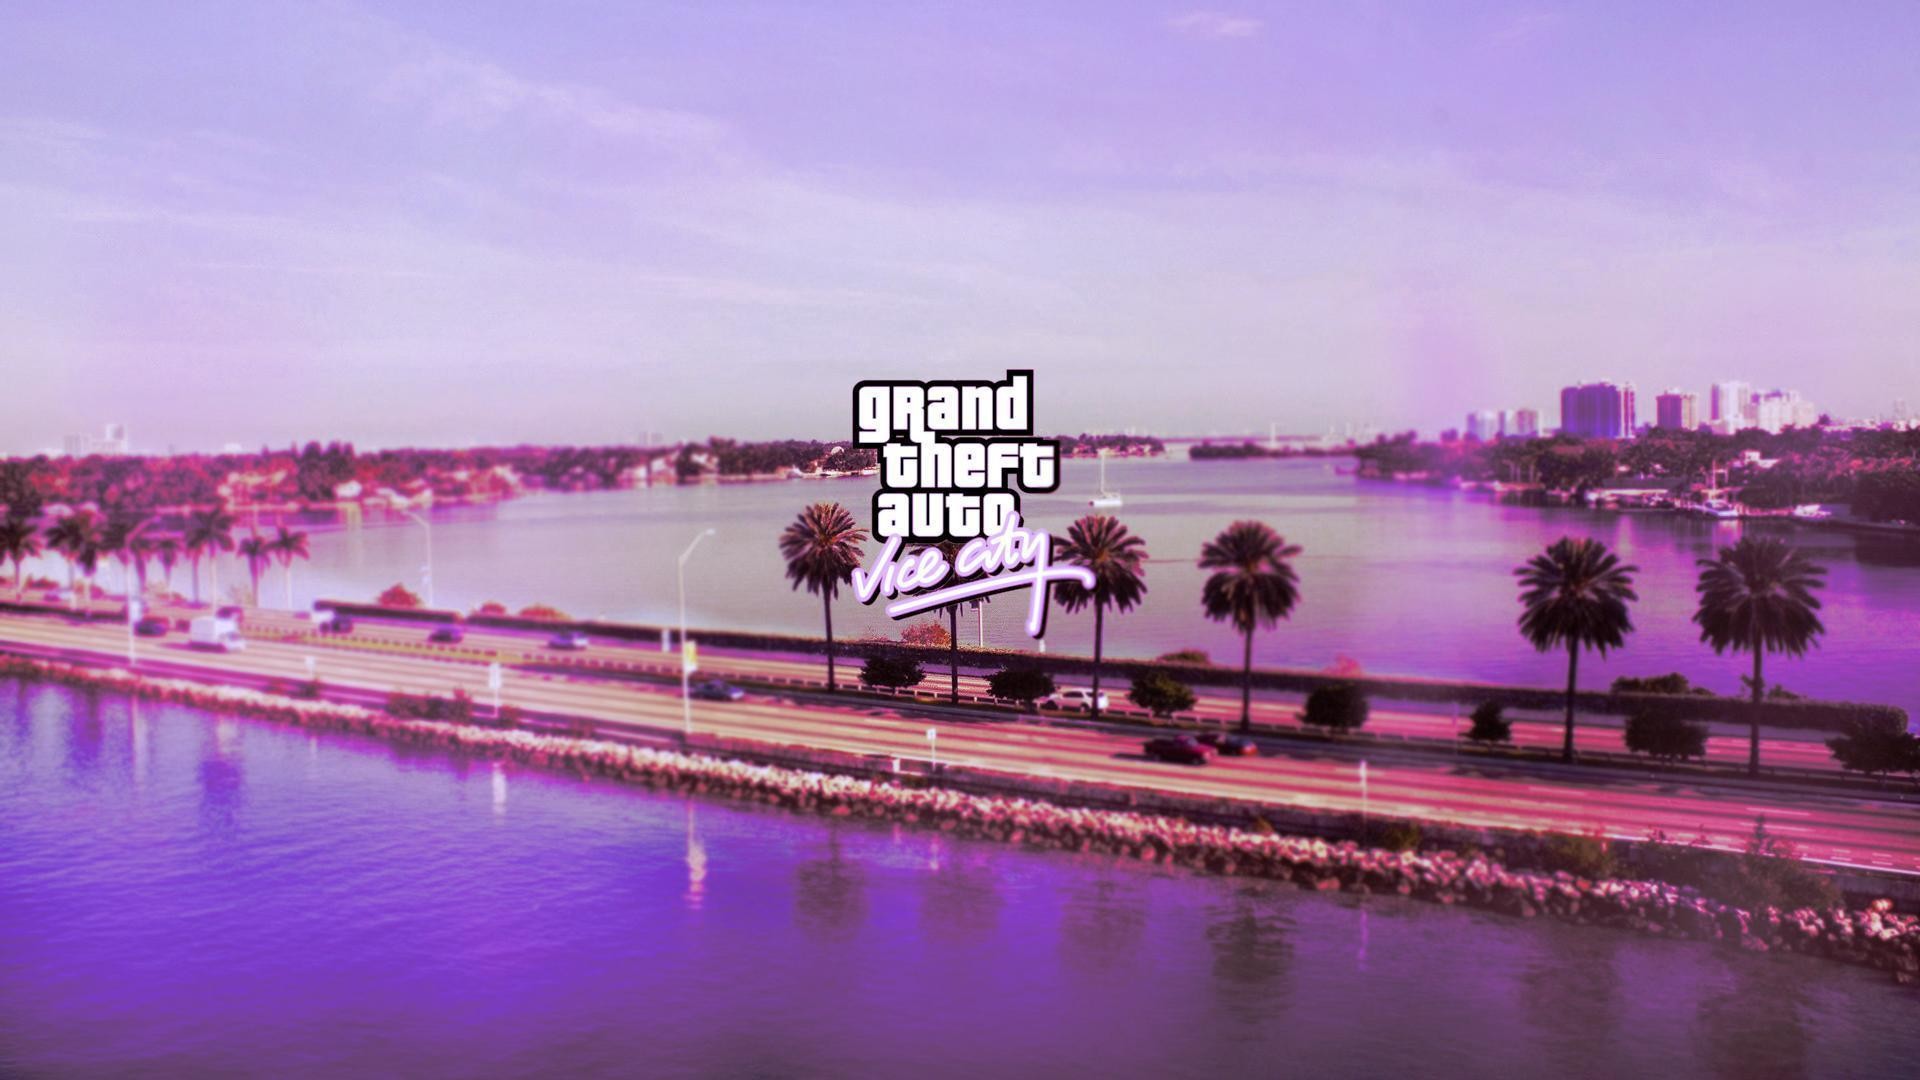 1920x1080 GTA Vice City Wallpaper I made for my friend - Imgur